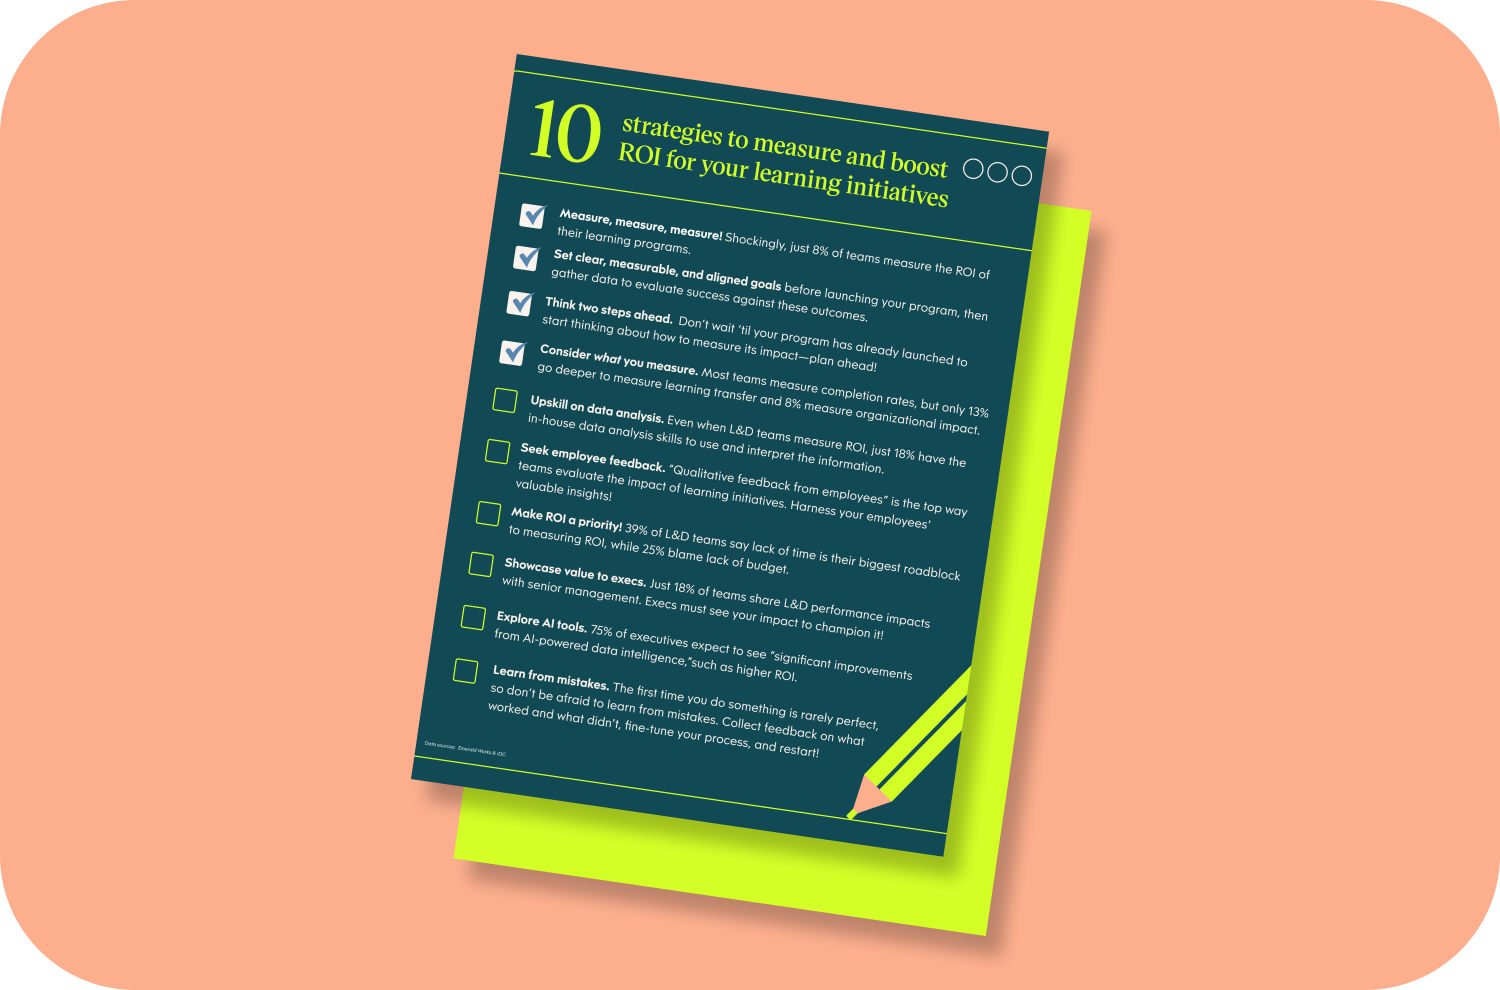 Checklist: 10 strategies to measure and boost ROI for your learning initiatives